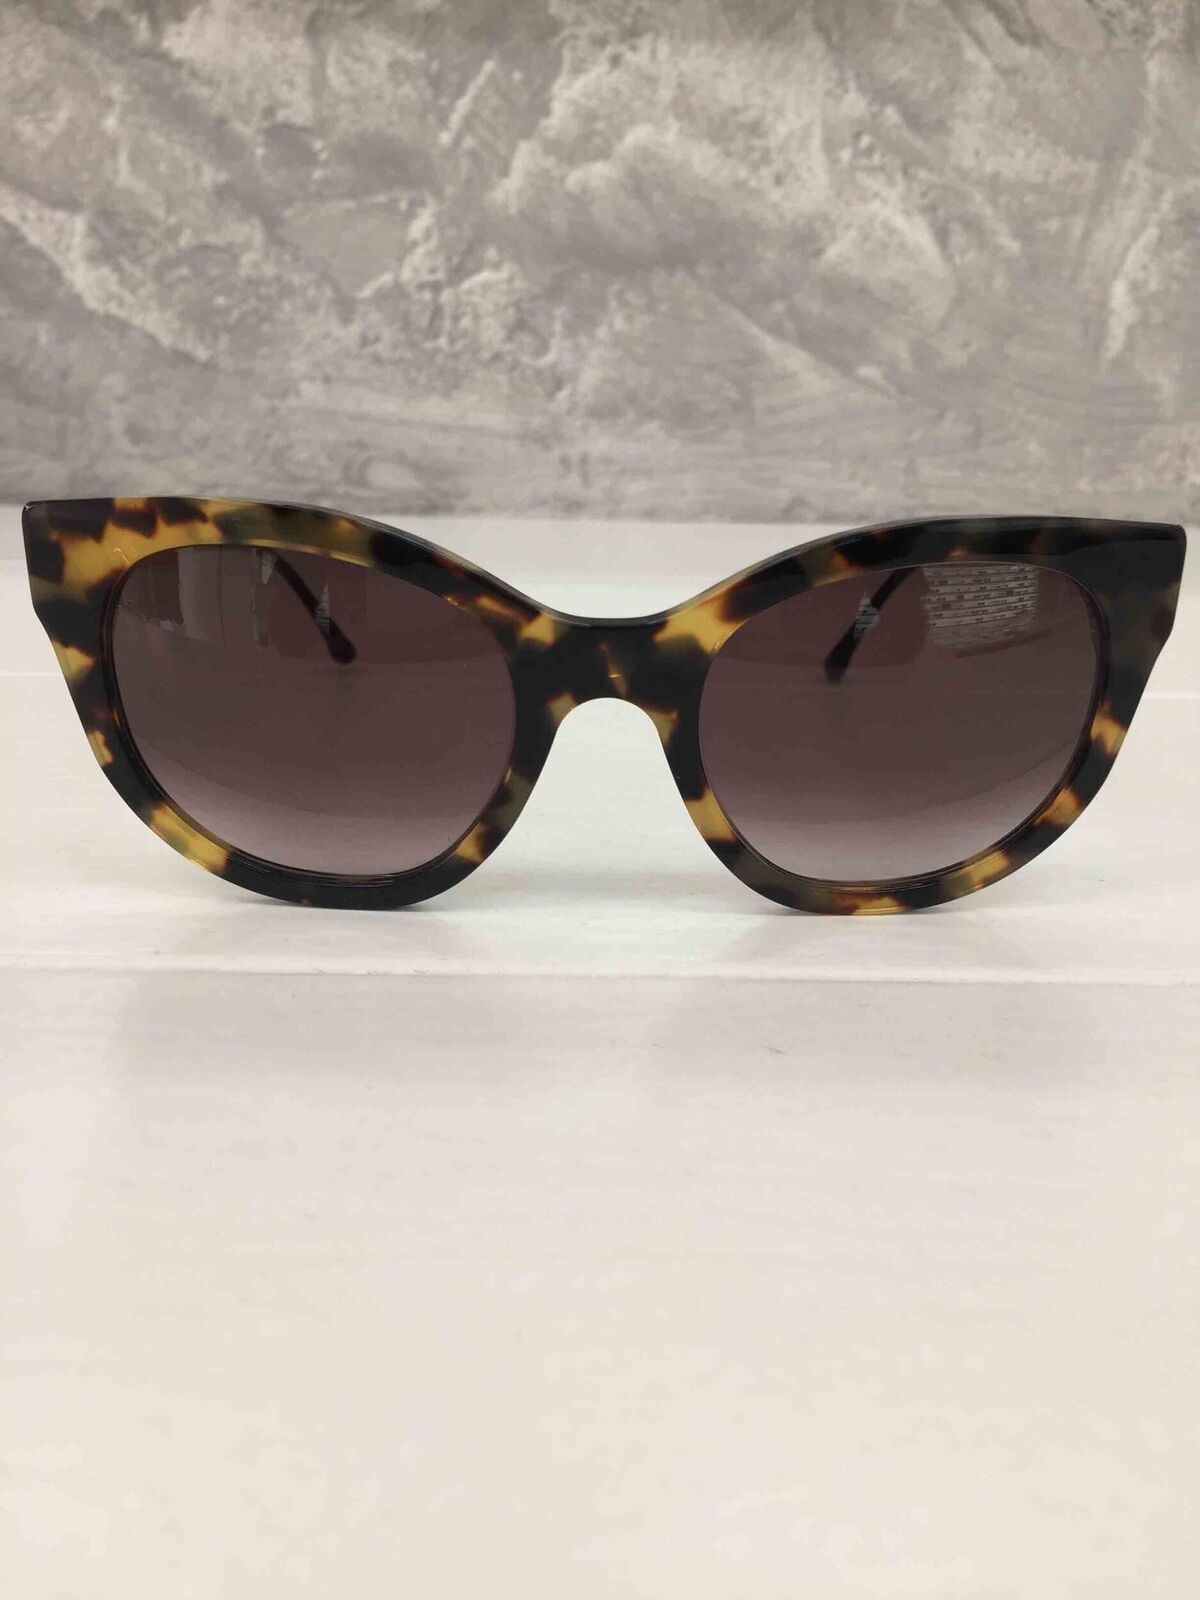 Sunglasses Thierry Lasry Lively 228 56 21 140 Tortoise Brown gradient Lens 100%